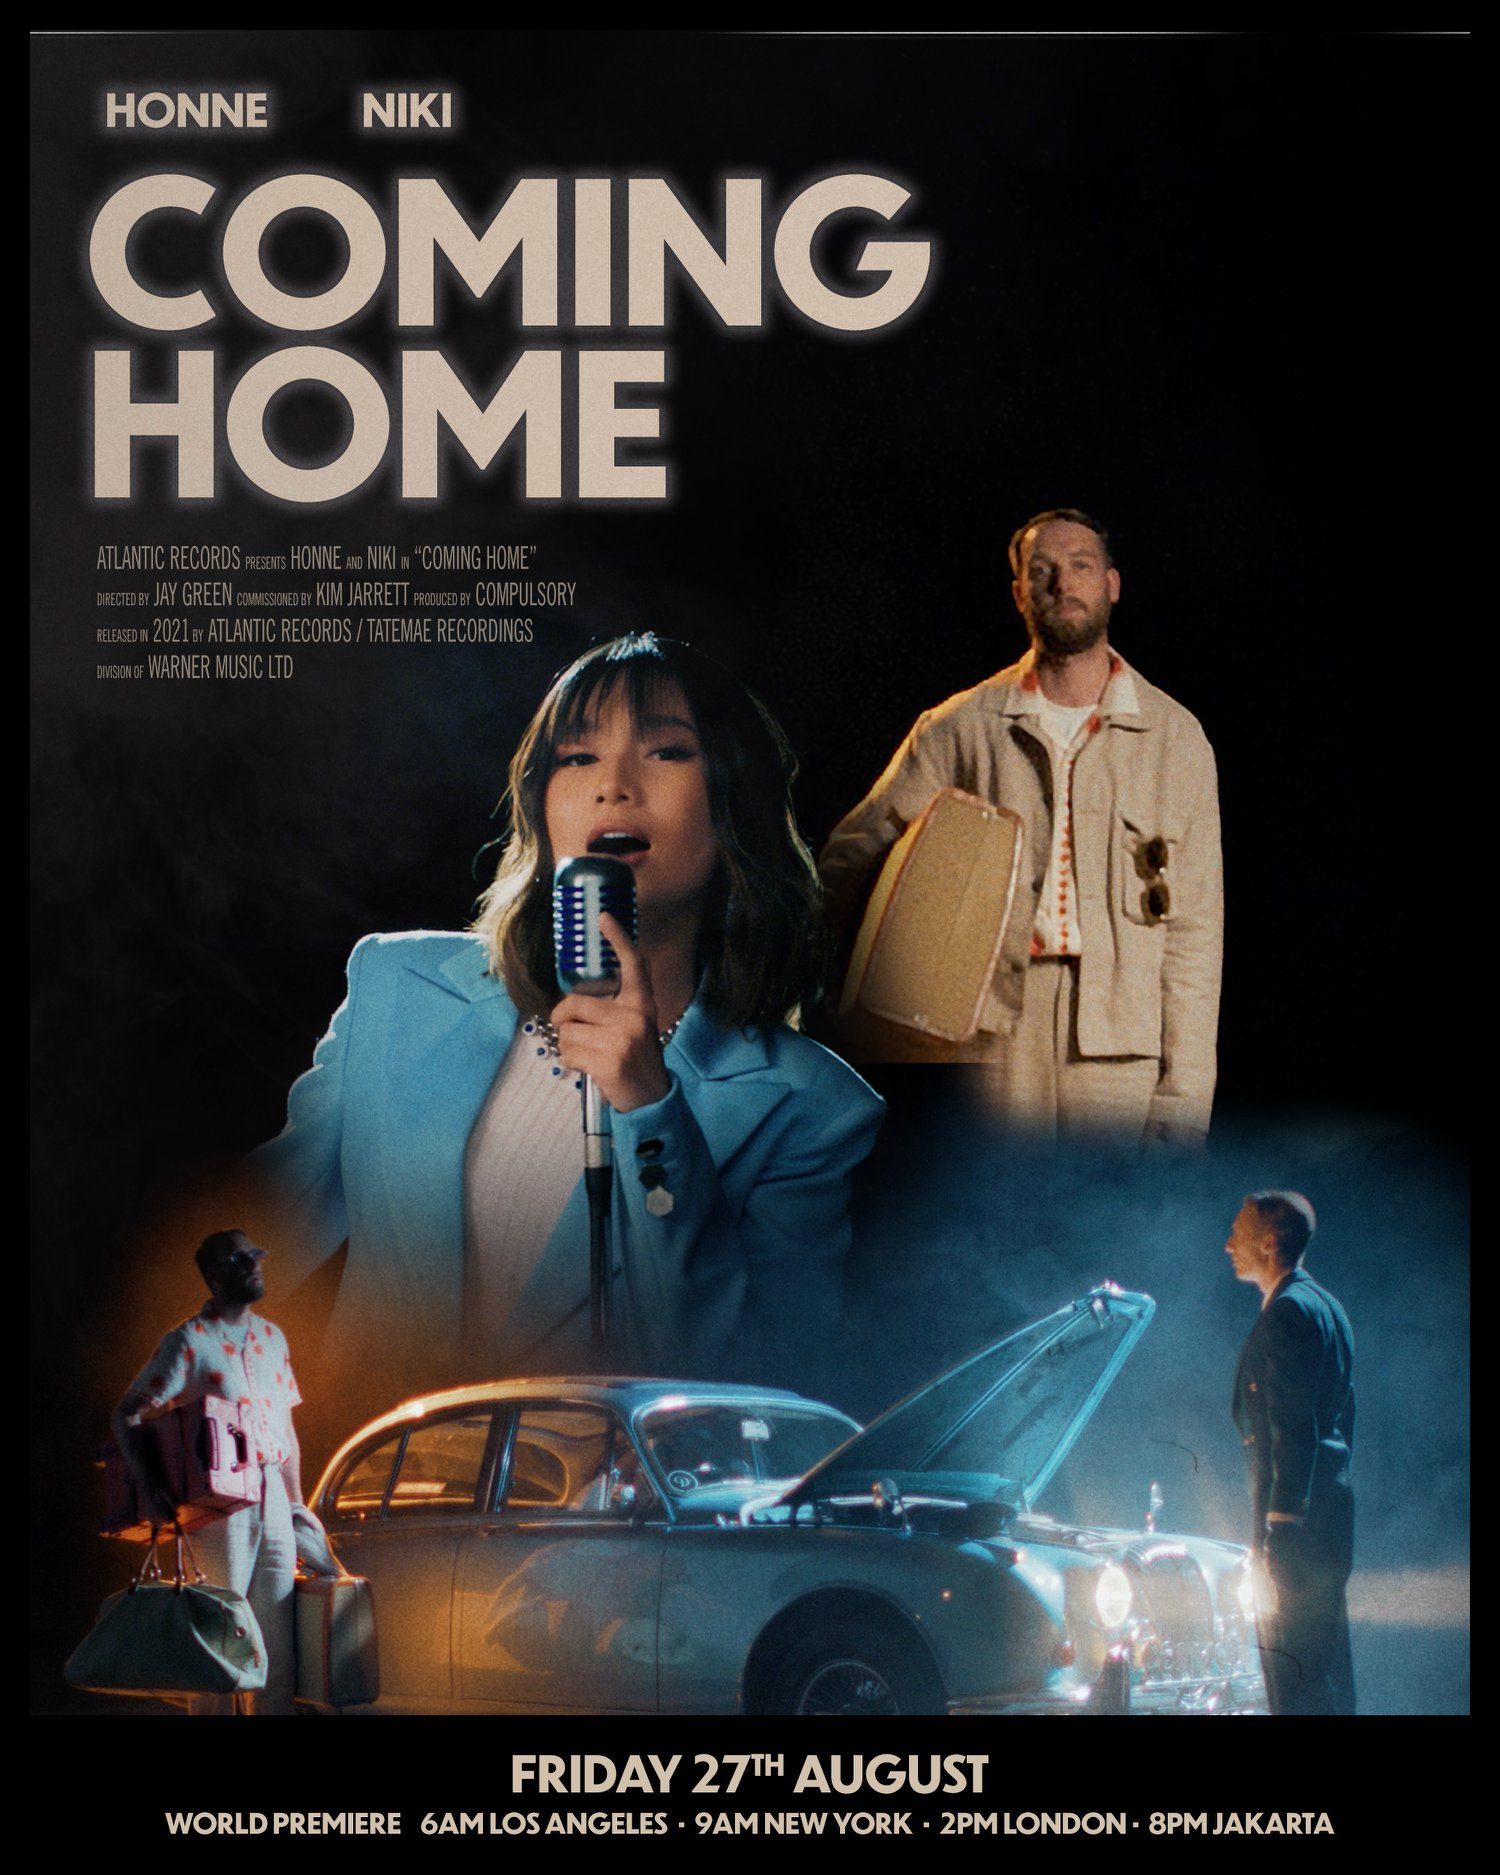 LISTEN: HONNE releases new single ‘Coming Home’ with NIKI